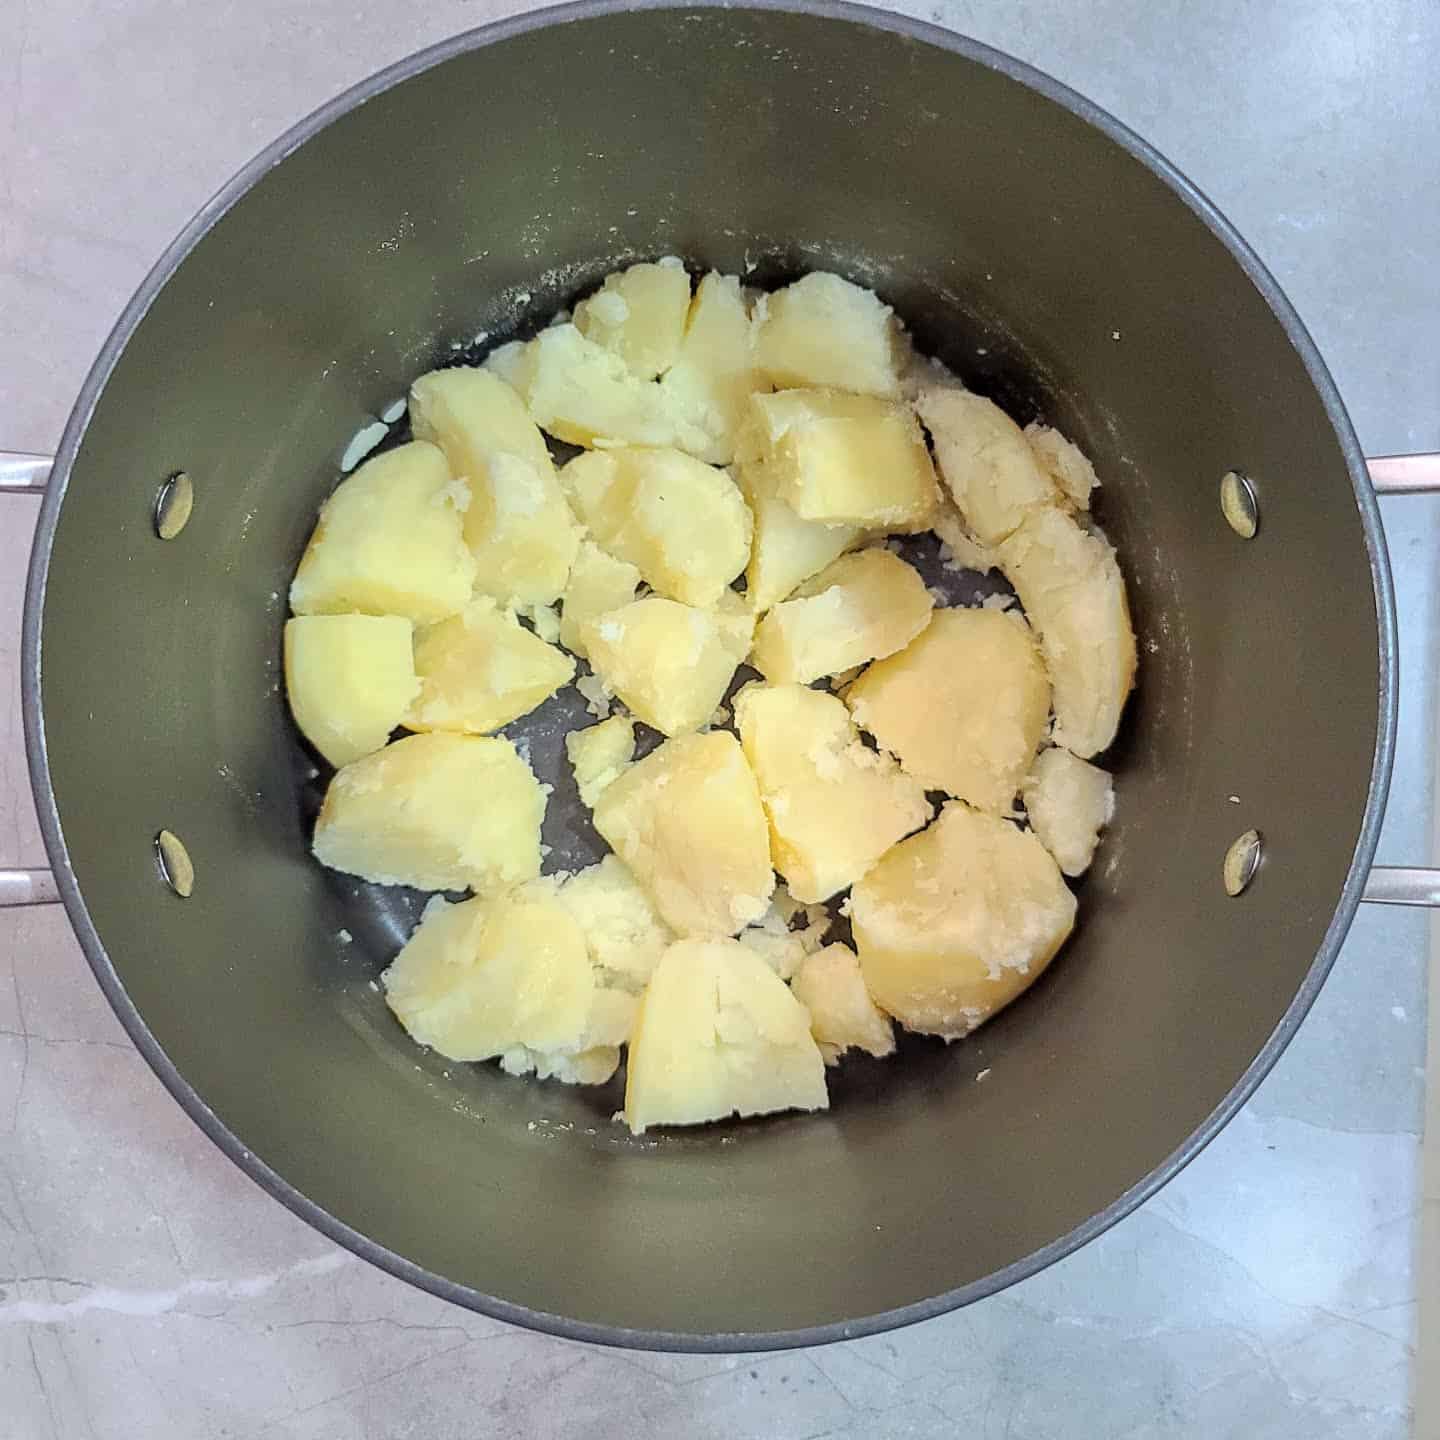 mashed potatoes drained